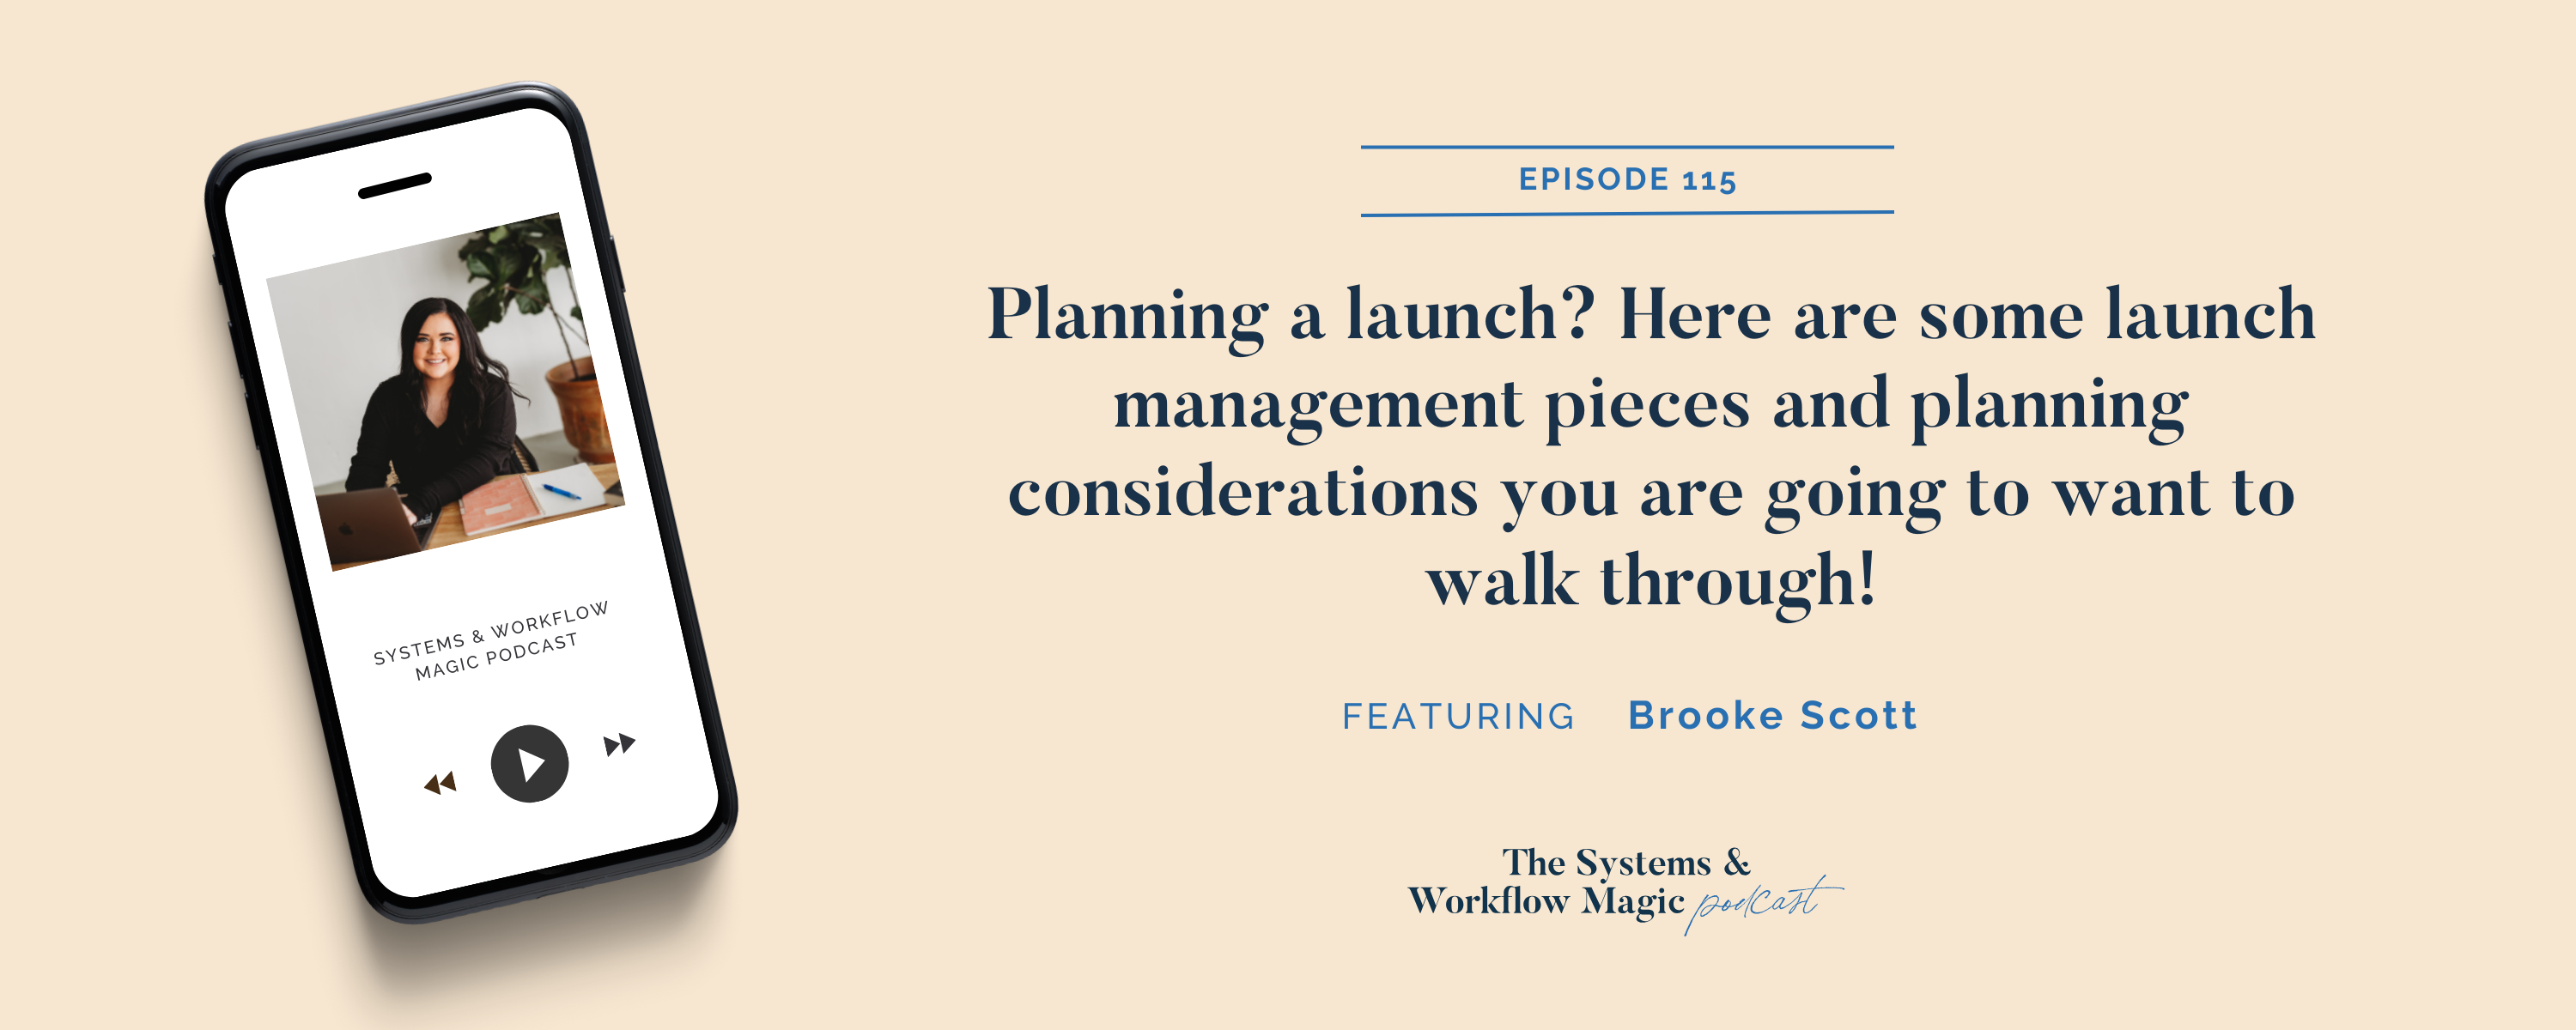 Wordpress_Banner_Of_The_Systems_And_Workflow_Magic_Podcast_episode_115_featuring_Brooke_Scott